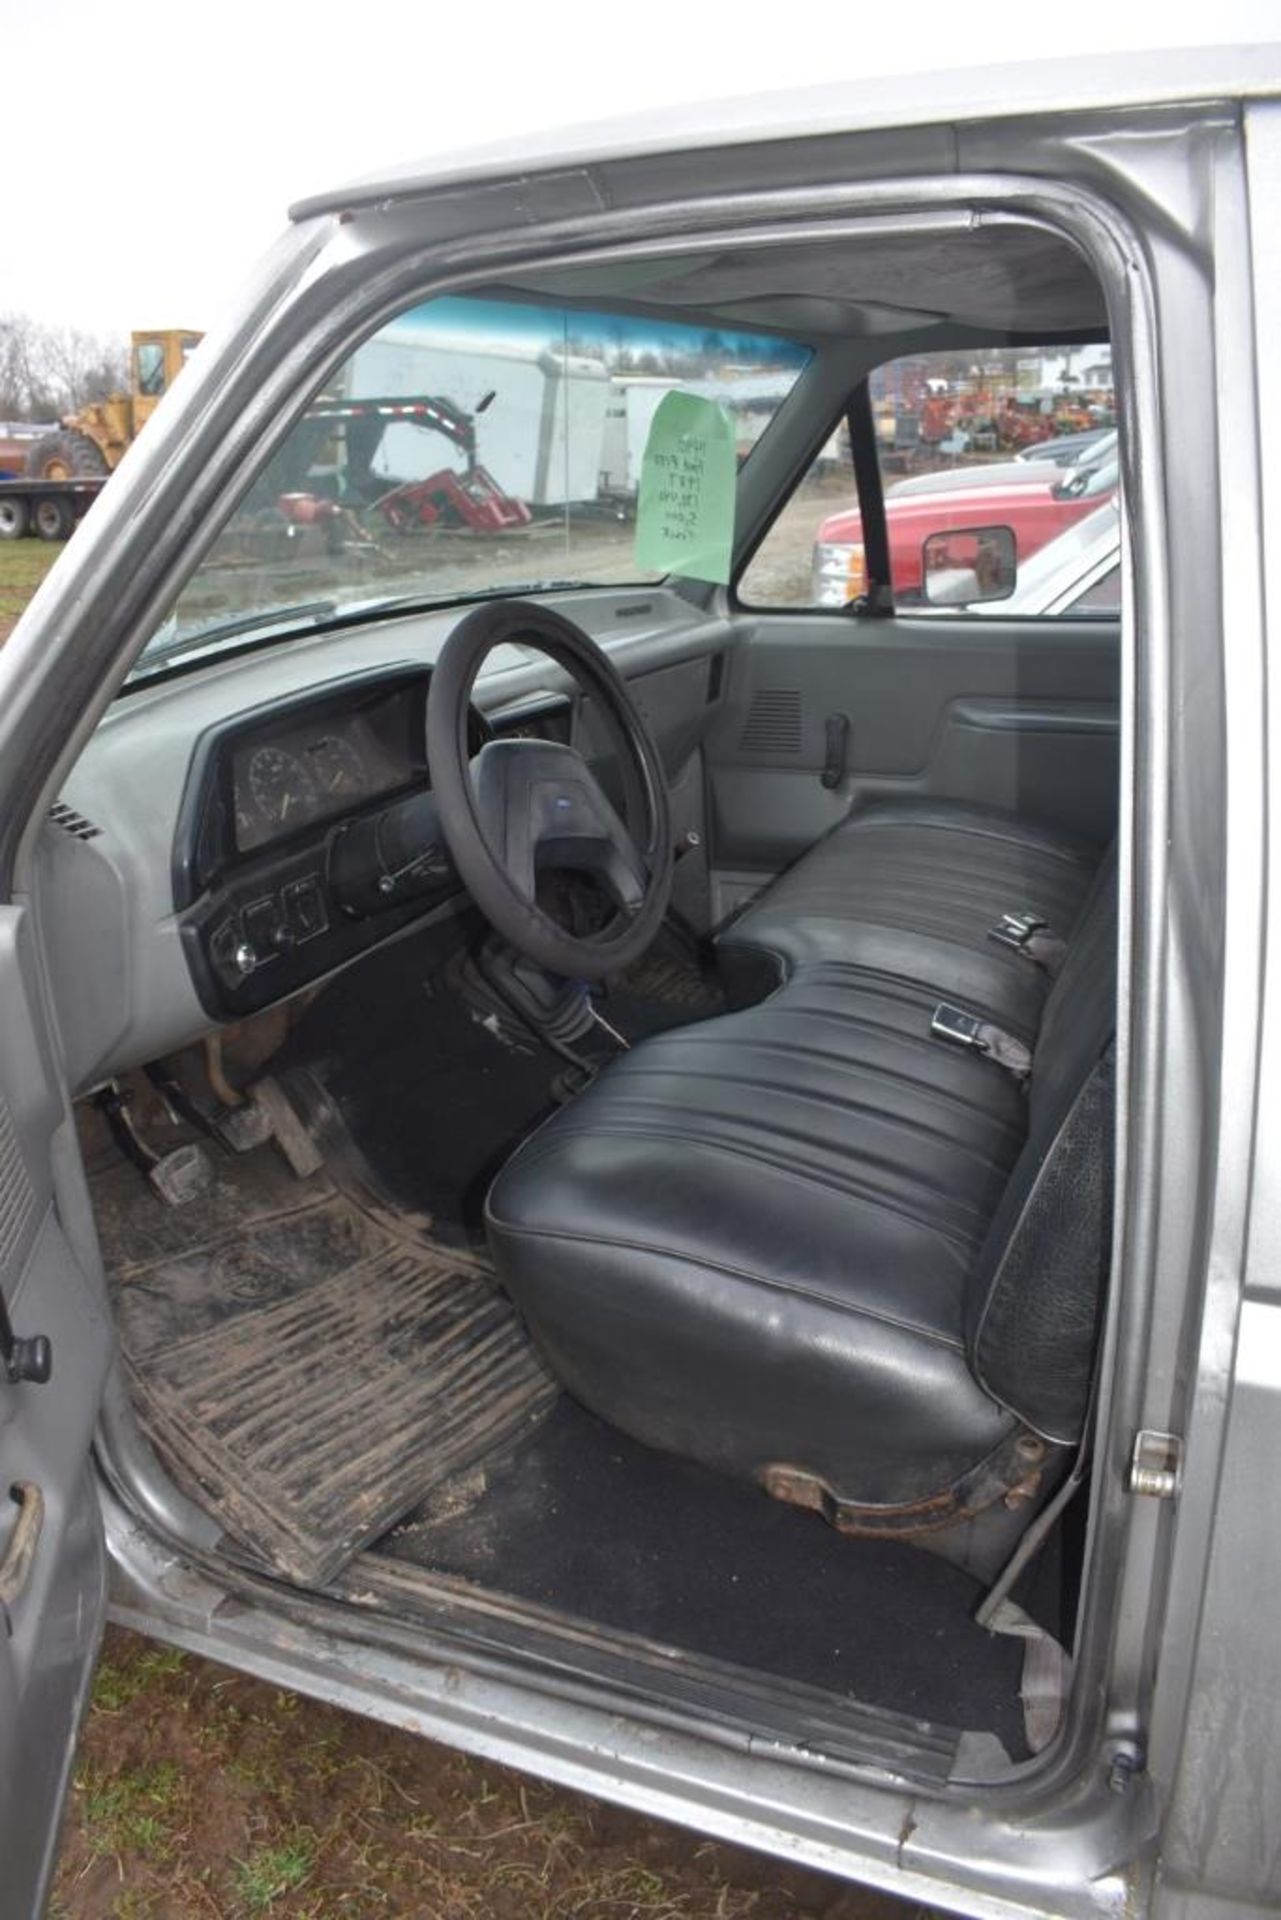 1987 Ford F-150 Truck - Image 28 of 36